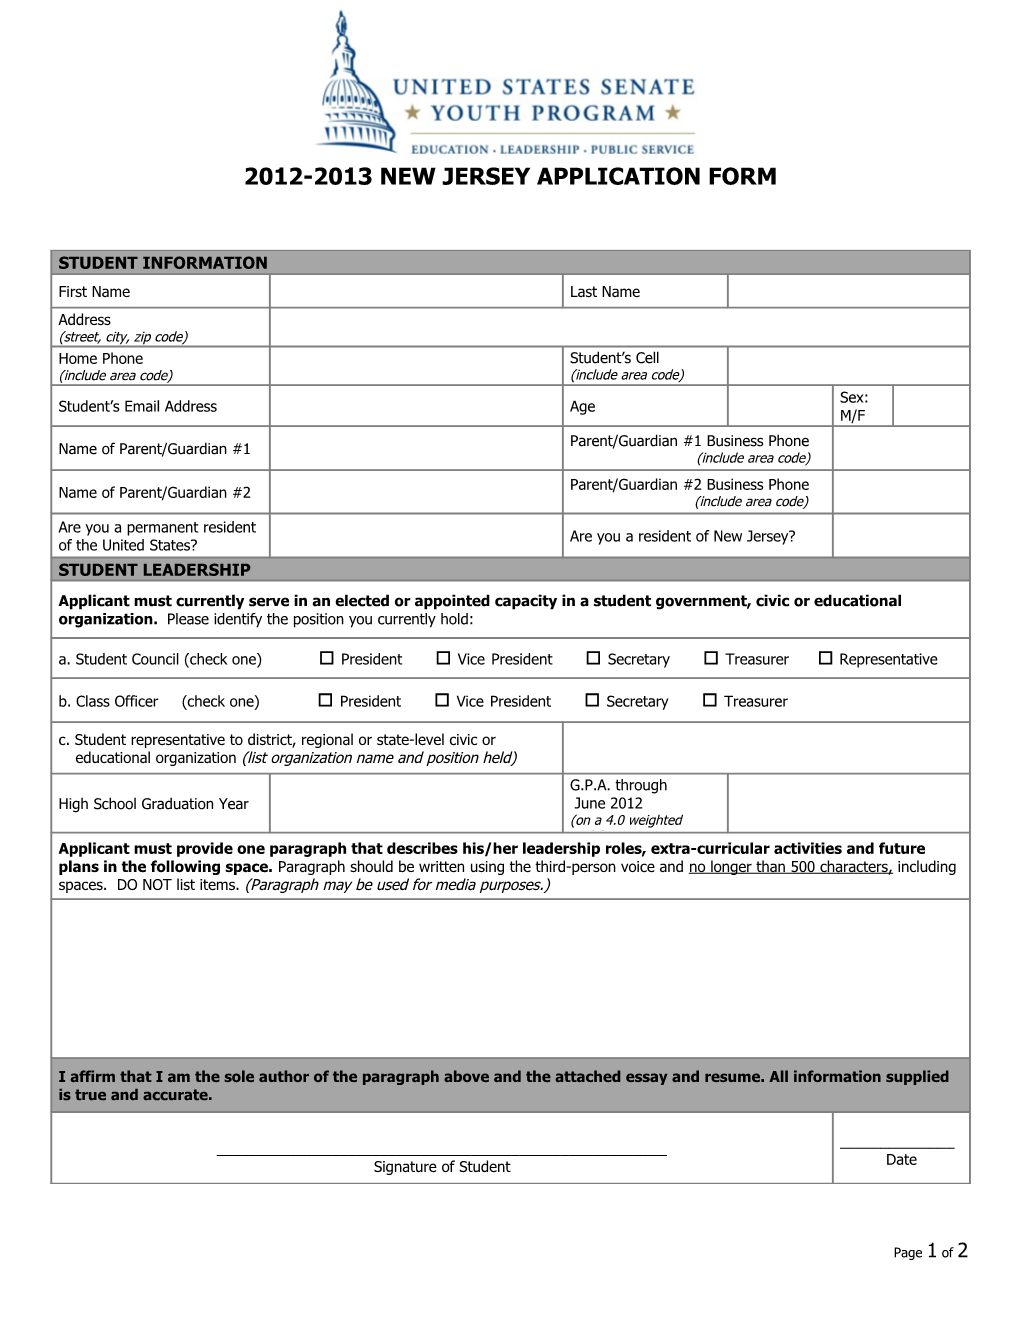 2012-2013 New Jersey Application Form